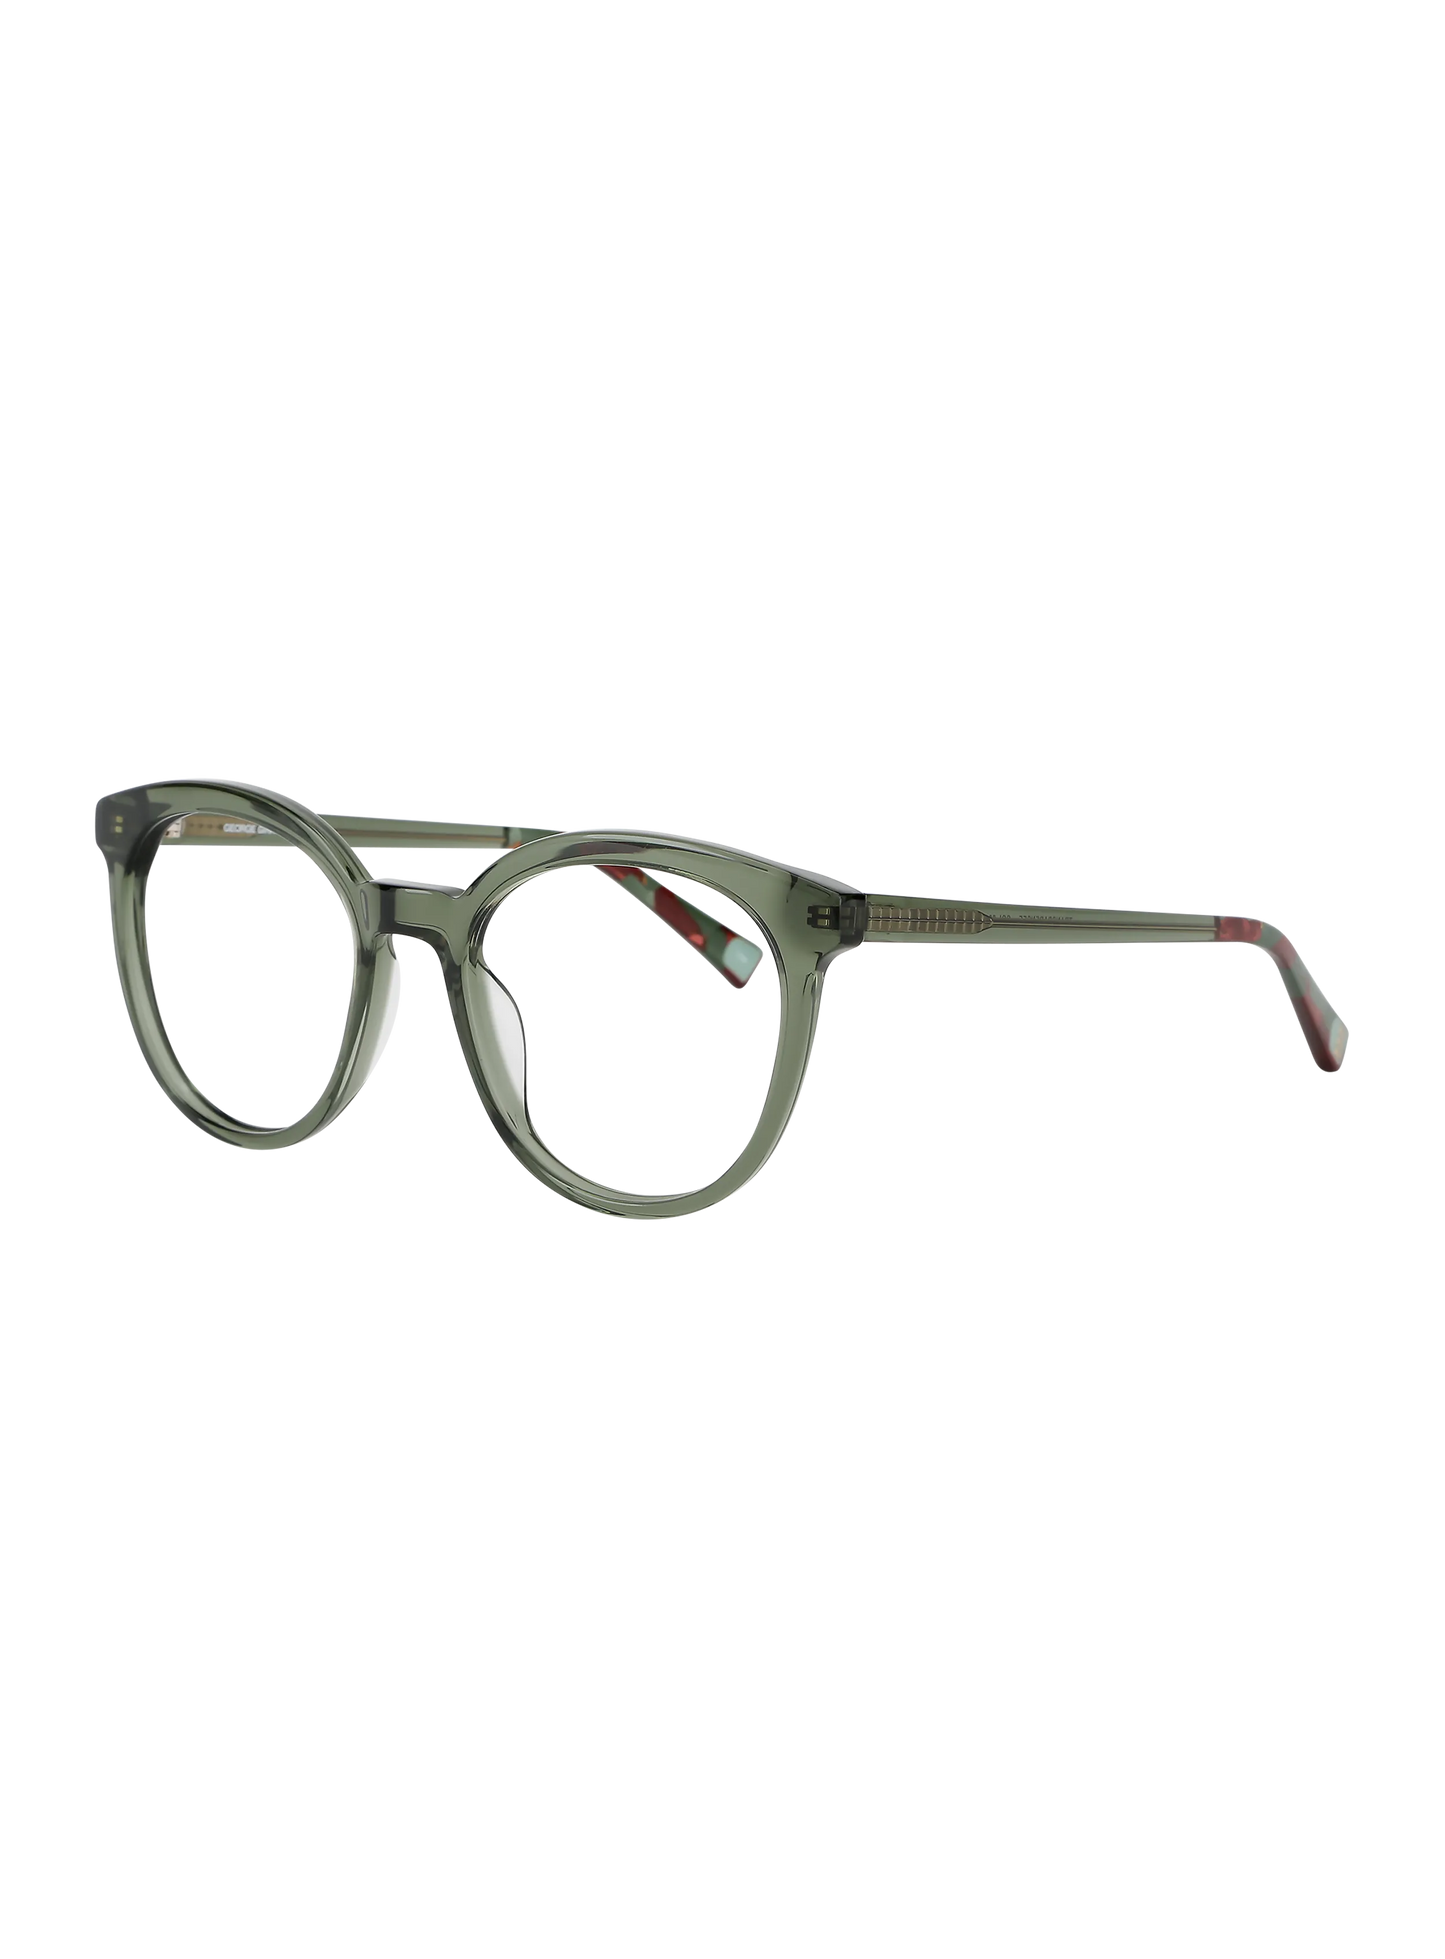 Farbe_clear olive 004